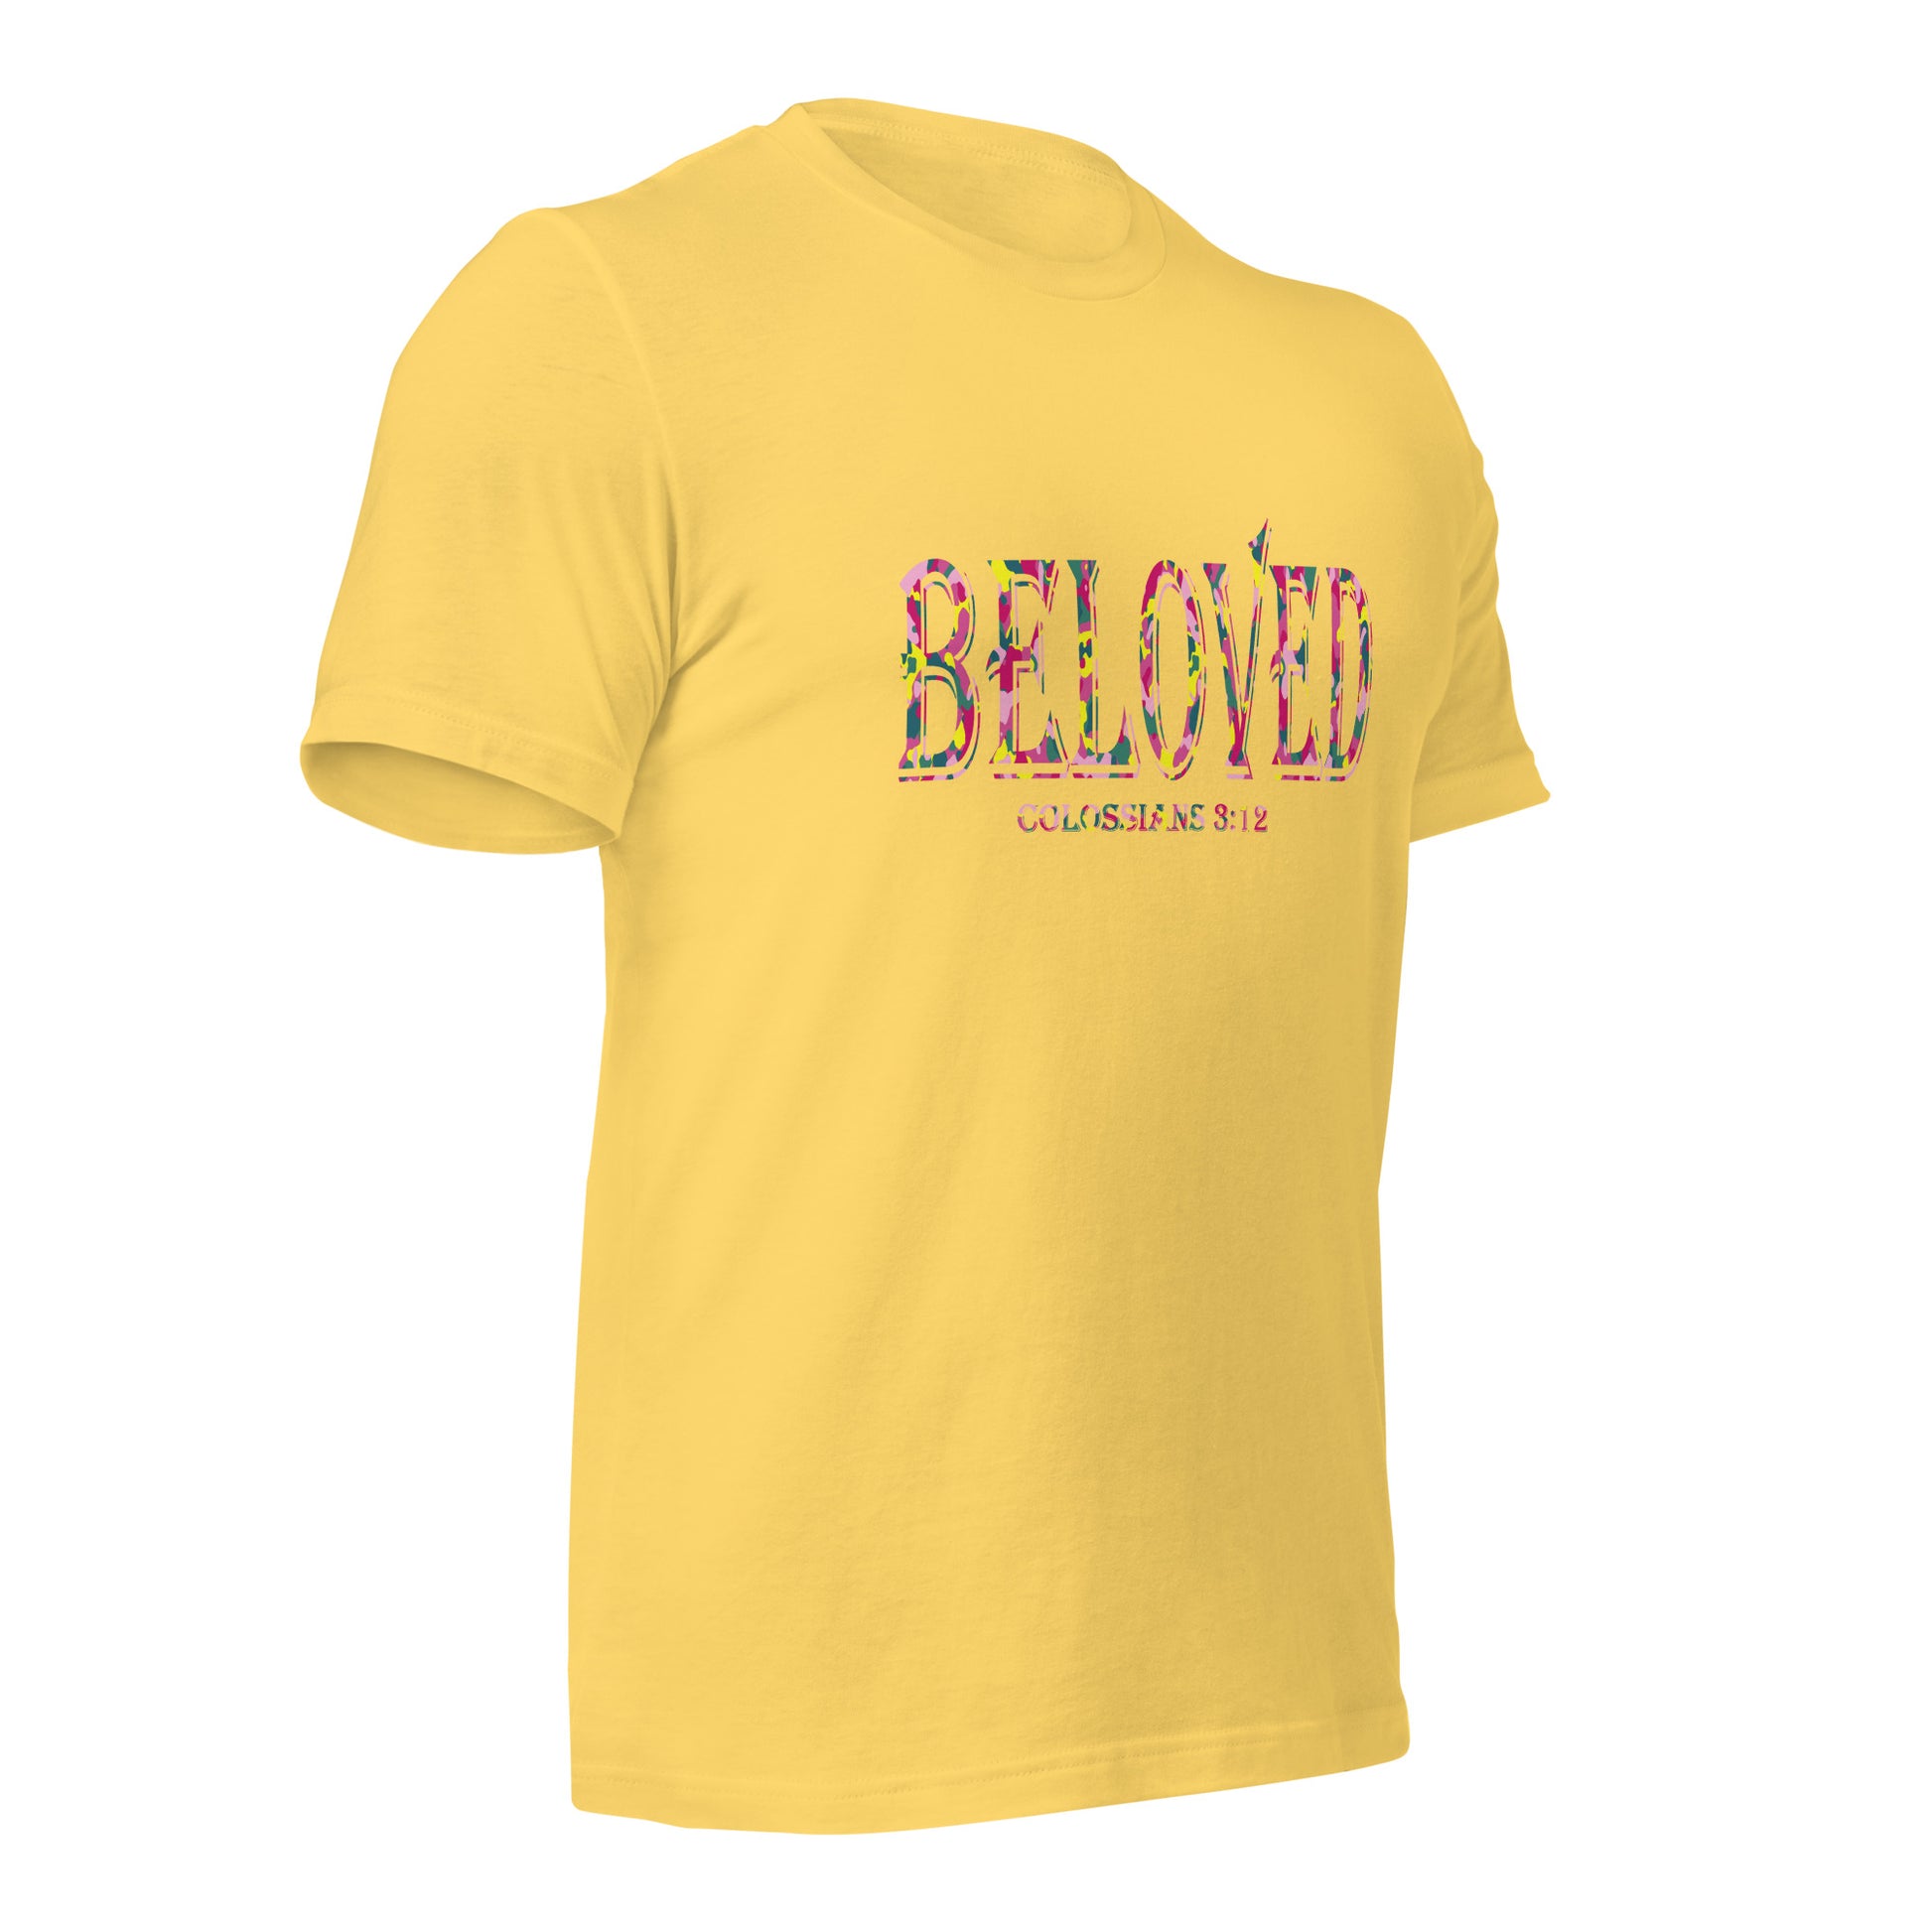 Colossians 3:12 Beloved T-shirt yellow angled view